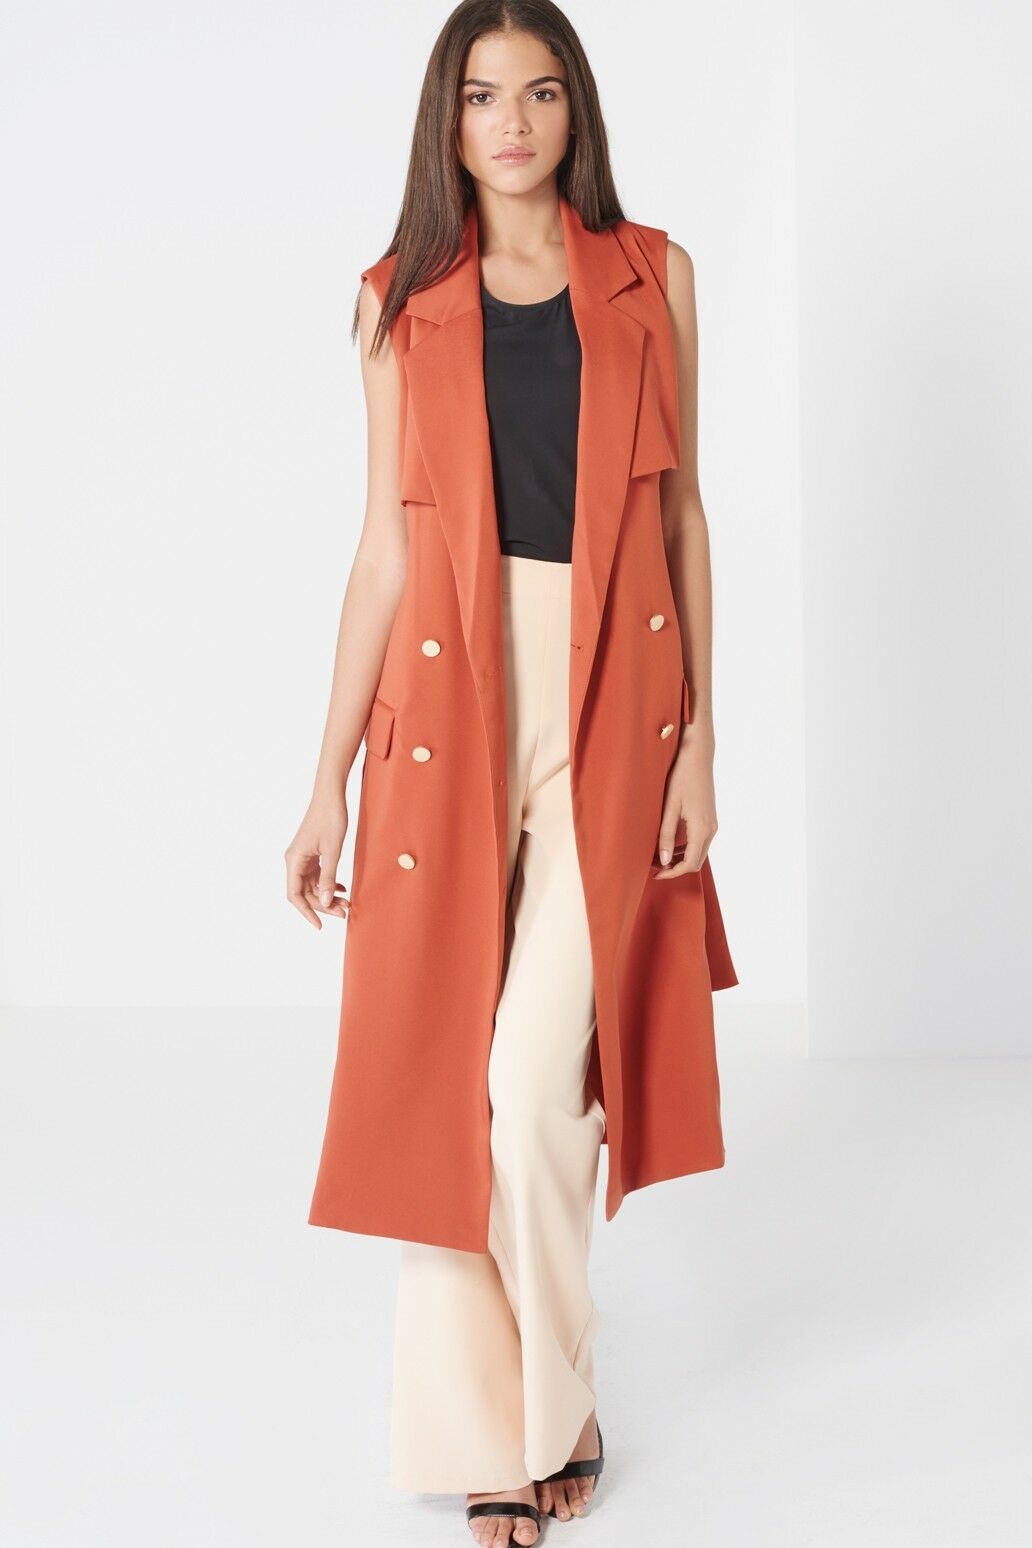 Terracotta Sleeveless Trench Coat - Front View